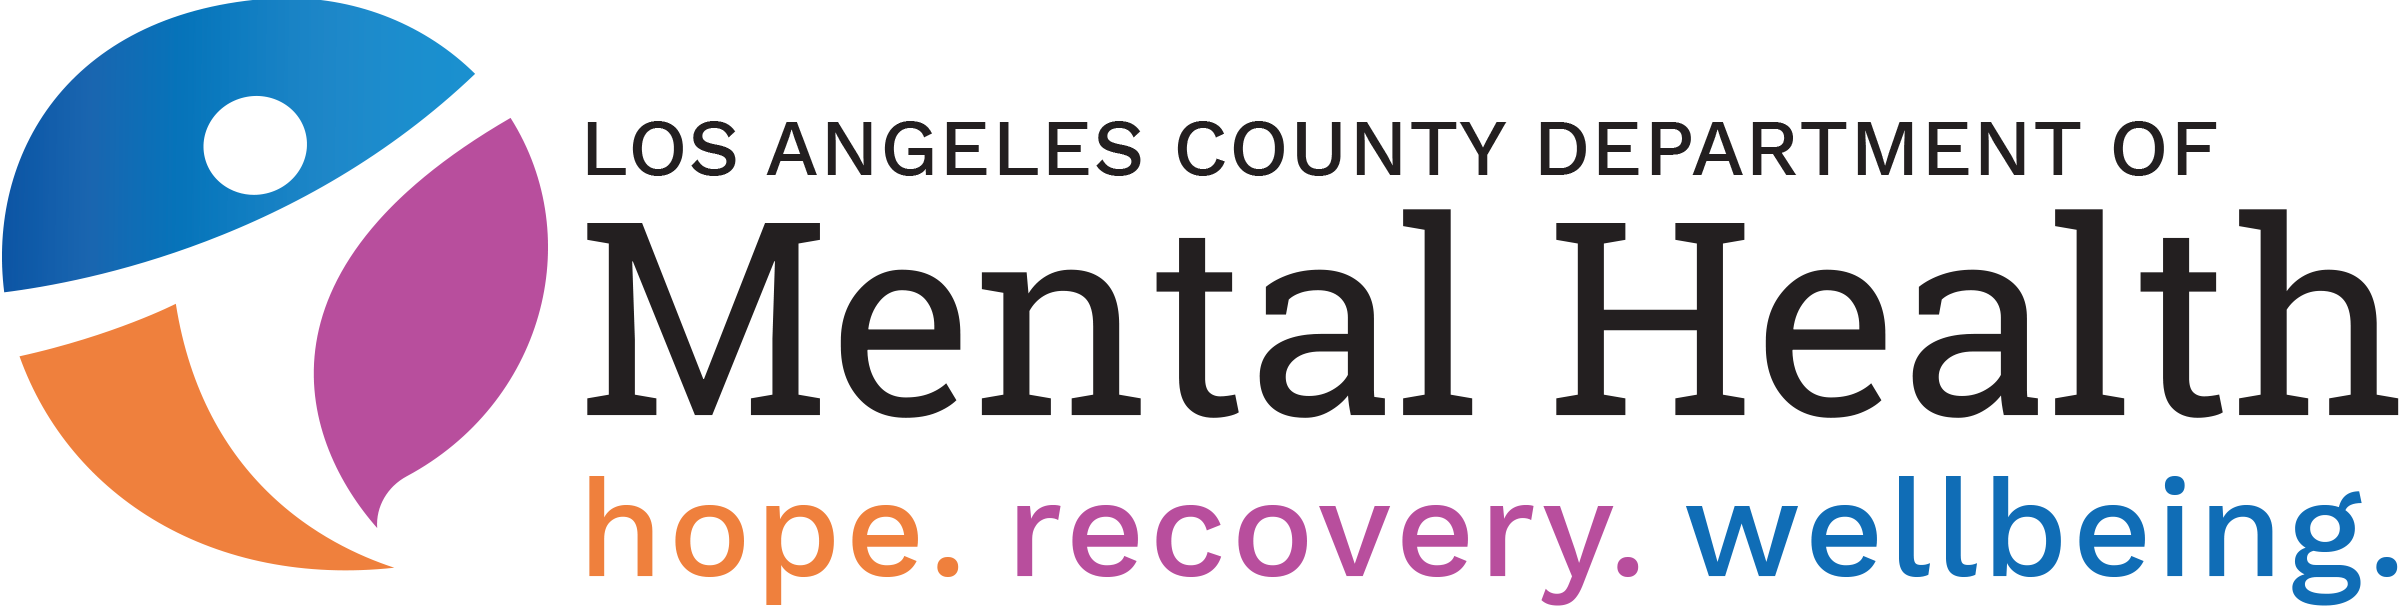 Los Angeles County Department of Mental Health